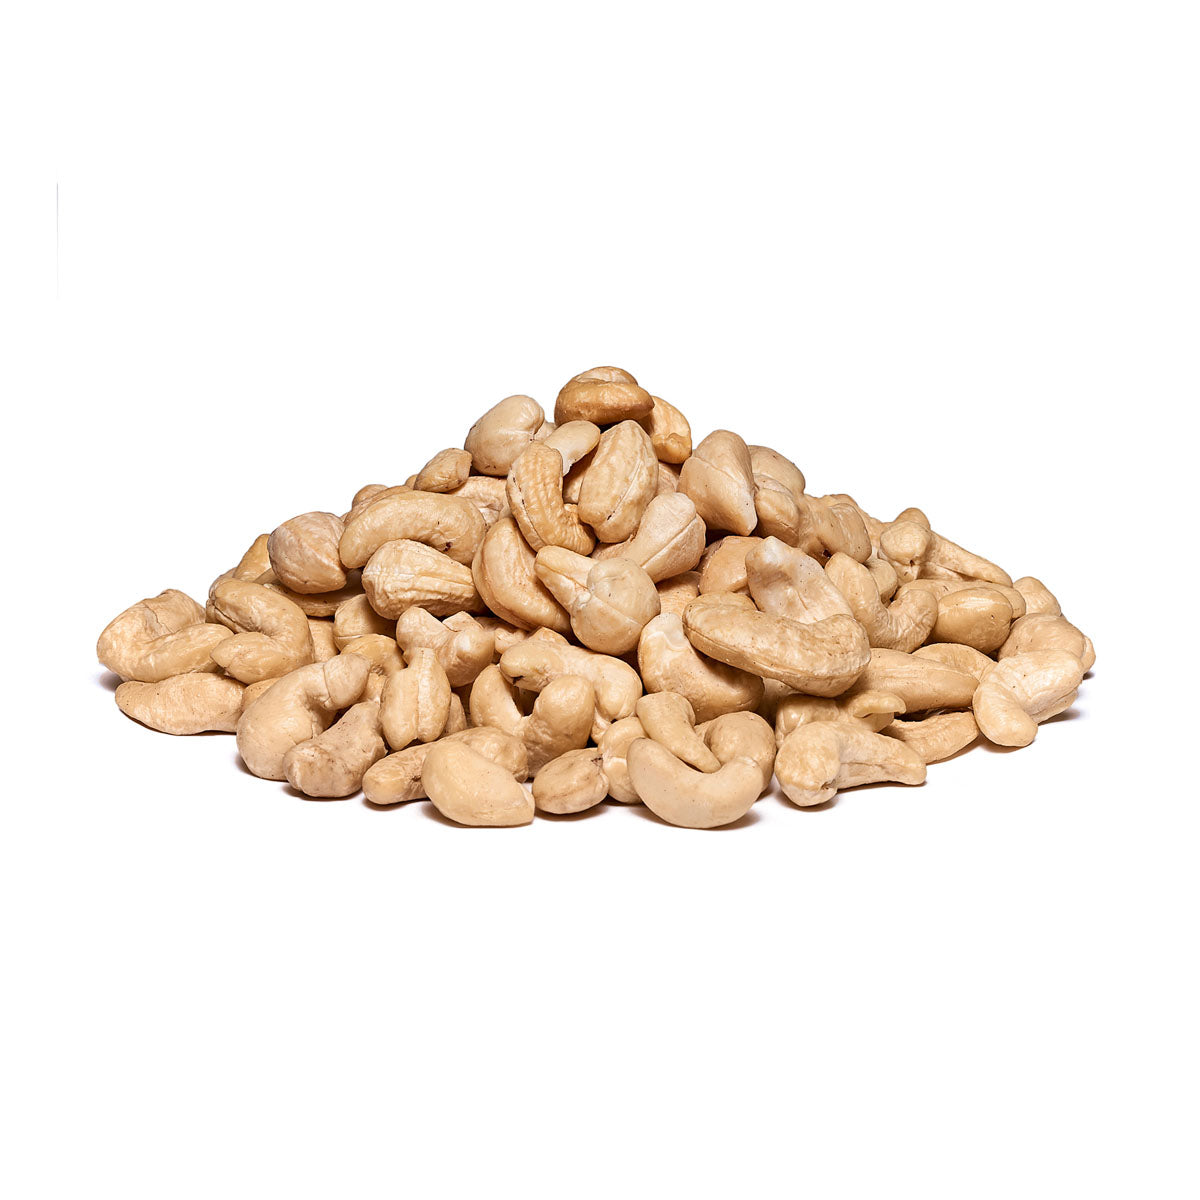 Organic Cashew Nuts | Raw Living UK | Raw Foods | Nuts &amp; Seeds | Raw Living Organic Hand-Cracked Cashew Nuts - best quality &amp; truly raw. Our raw cashews are creamy &amp; softer than heated store-bought versions. Can be sprouted.